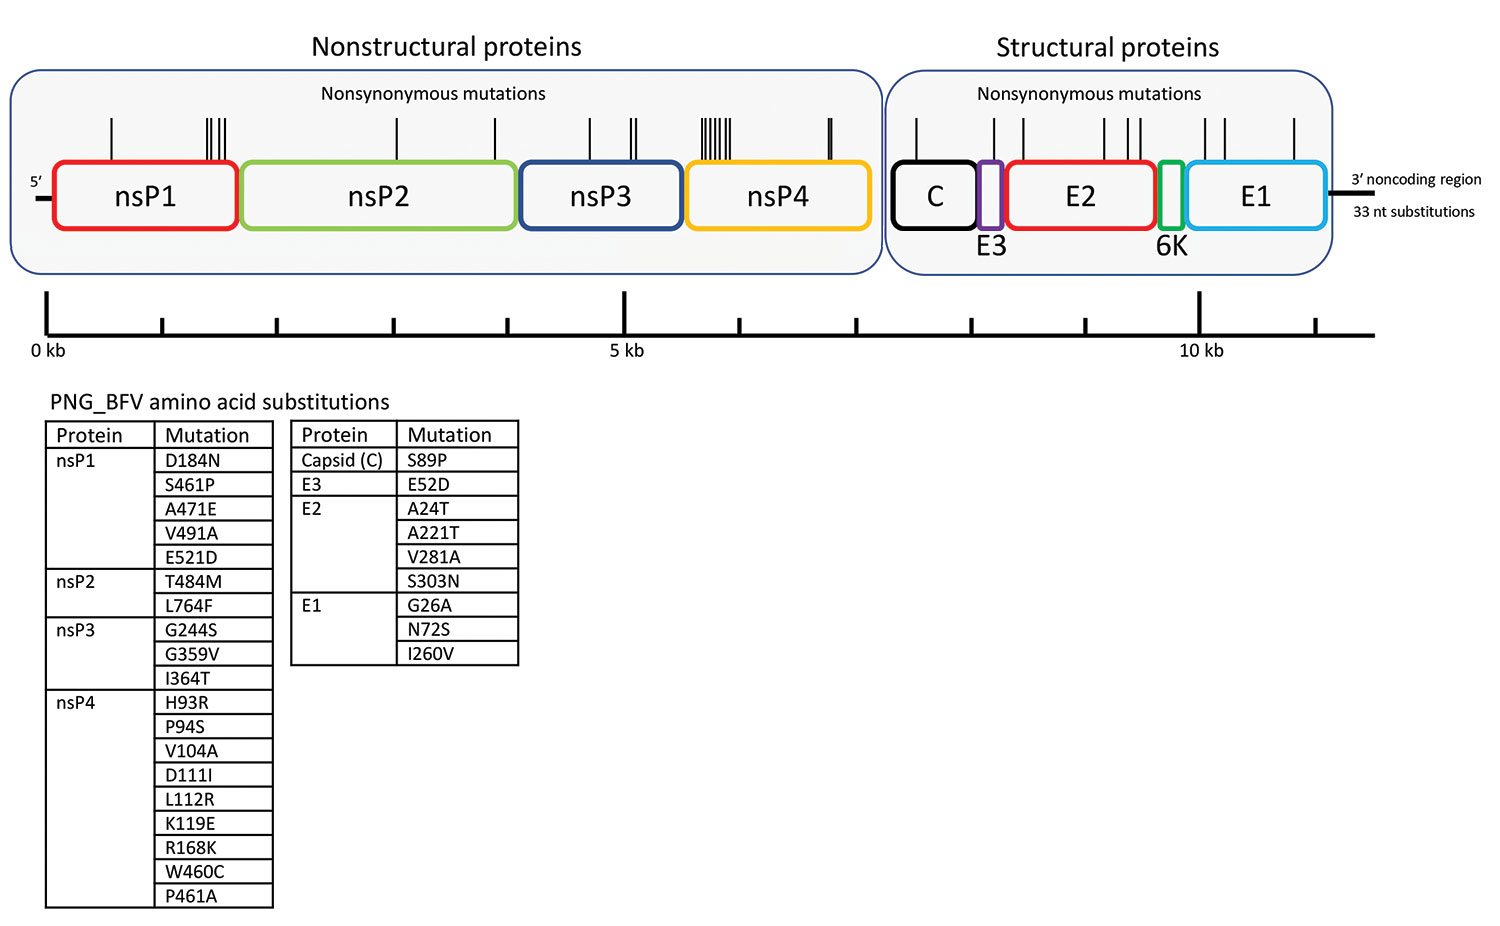 Schematic representation of the BFV genome showing location of amino acid differences between the PNG_BFV (MN115377) isolate from a child in Papua New Guinea and prototype strain BH2193 (RefSeq accession no. NC_001786.1). Amino acid substitutions in the PNG_BFV genome are shown in nonstructural proteins nsP1–4 (n = 19) and structural proteins C, E1–3, and 6K (n = 9) and listed below the schematic. BFV, Barmah Forest virus; C, capsid; E, envelope; nsP, nonstructural protein; PNG, Papua New Guinea